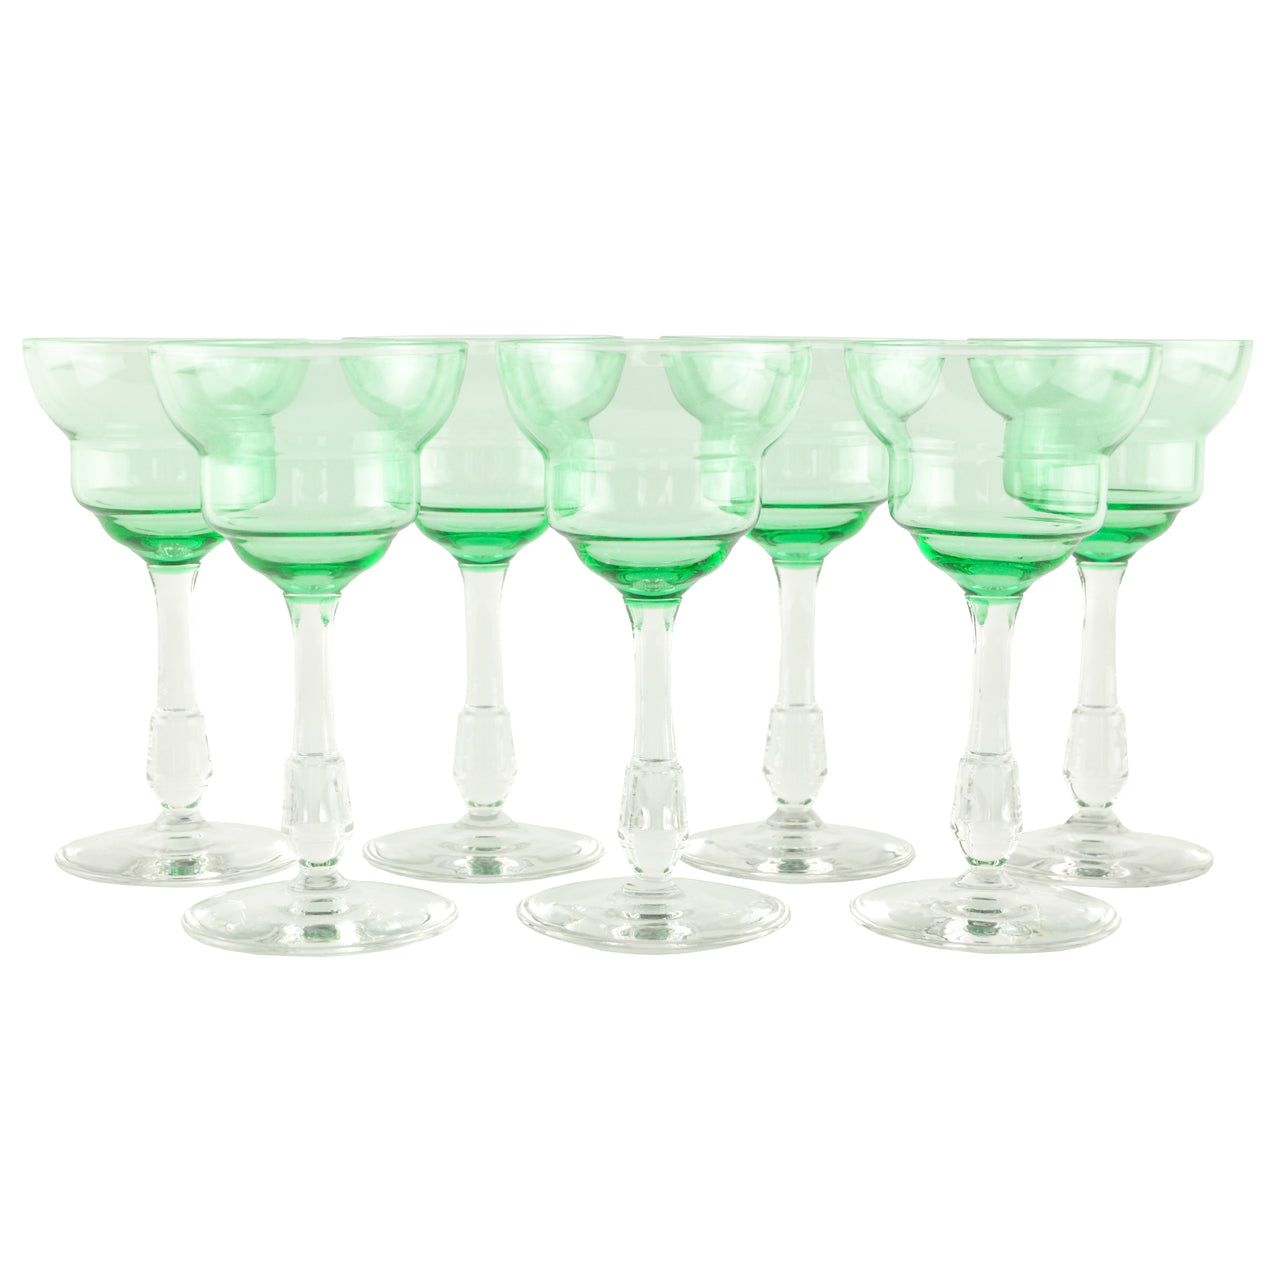 Libbey Tiki Coupe Cocktail Glasses, Set of 4 